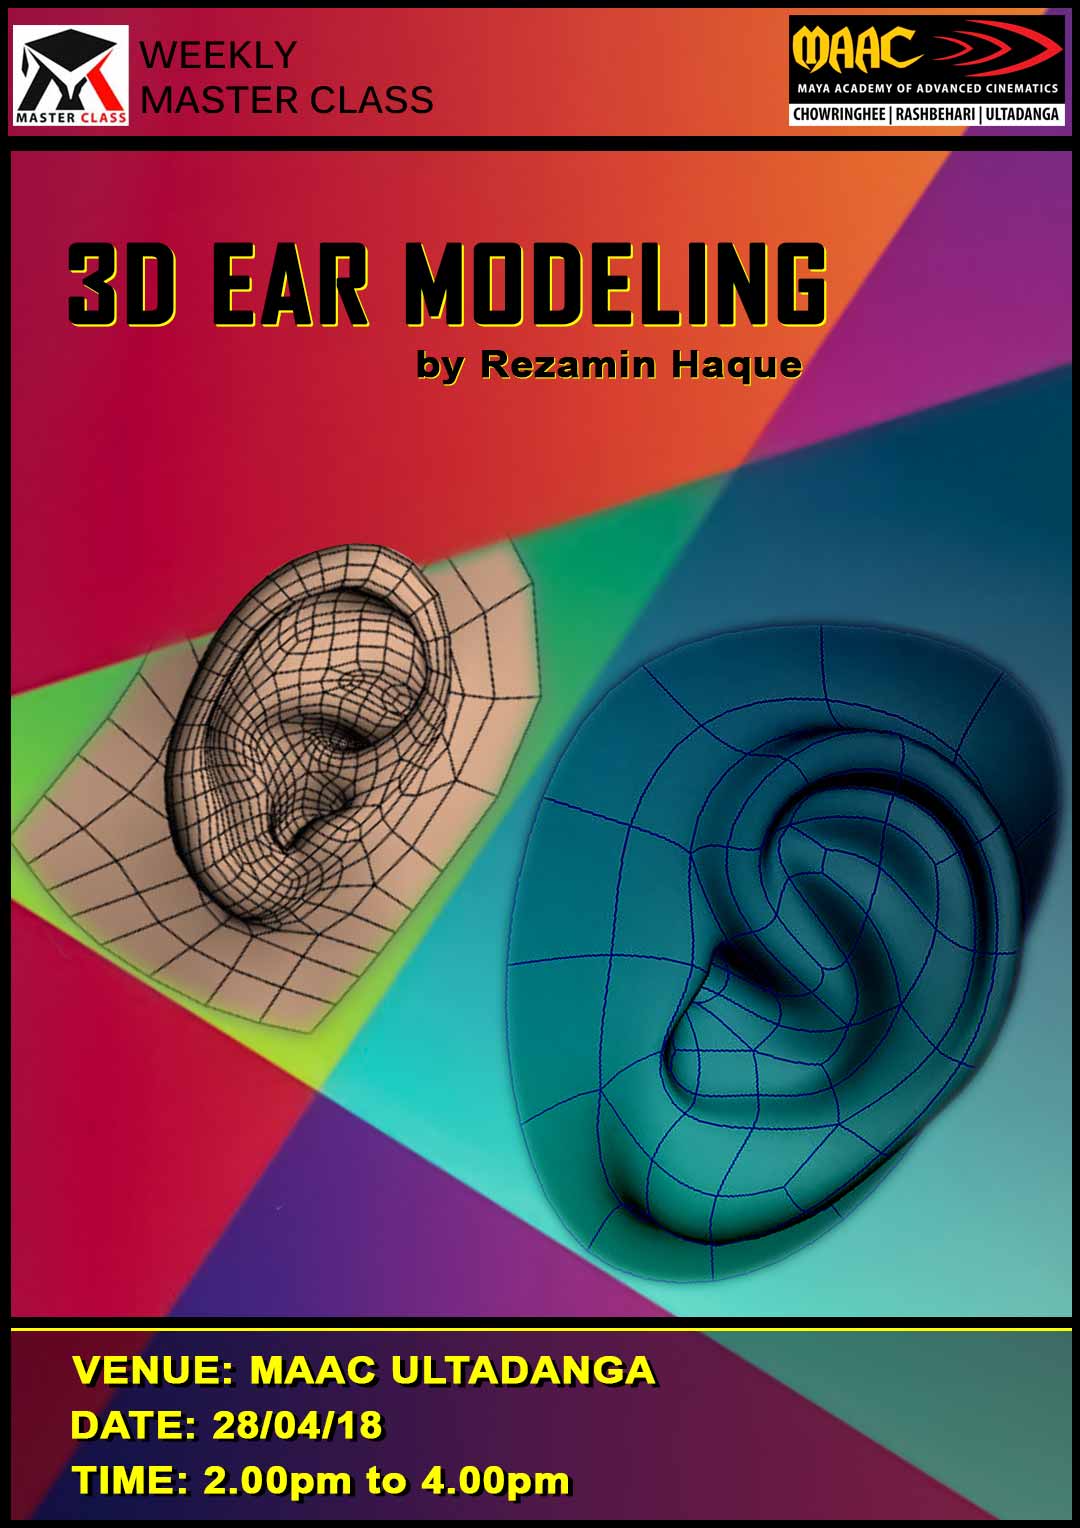 Weekly Master Class on 3D Ear Modeling